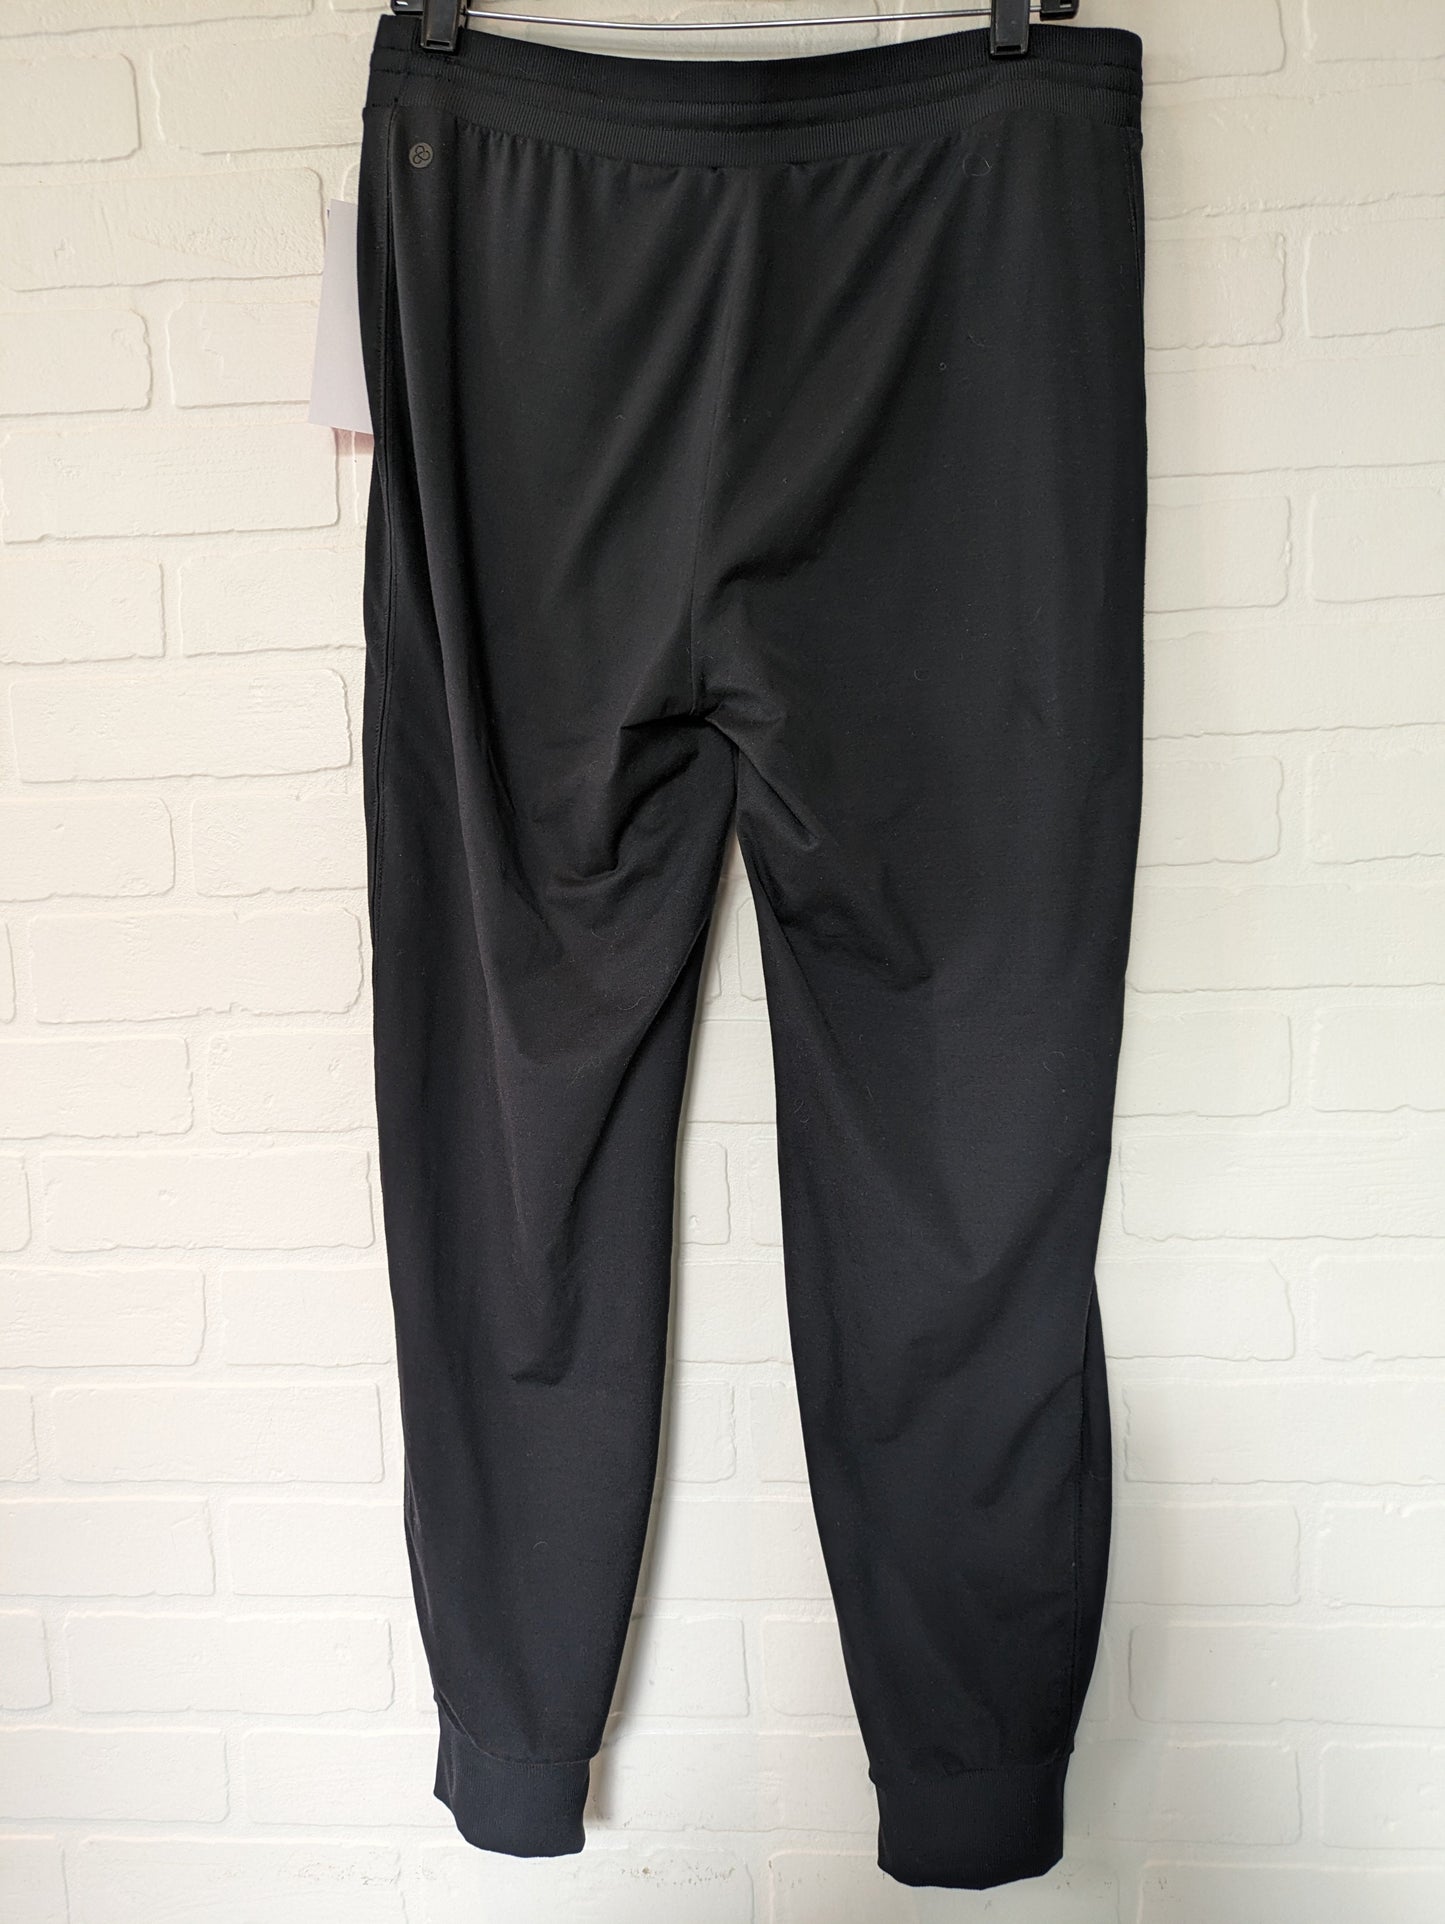 Athletic Pants By Zella  Size: 8